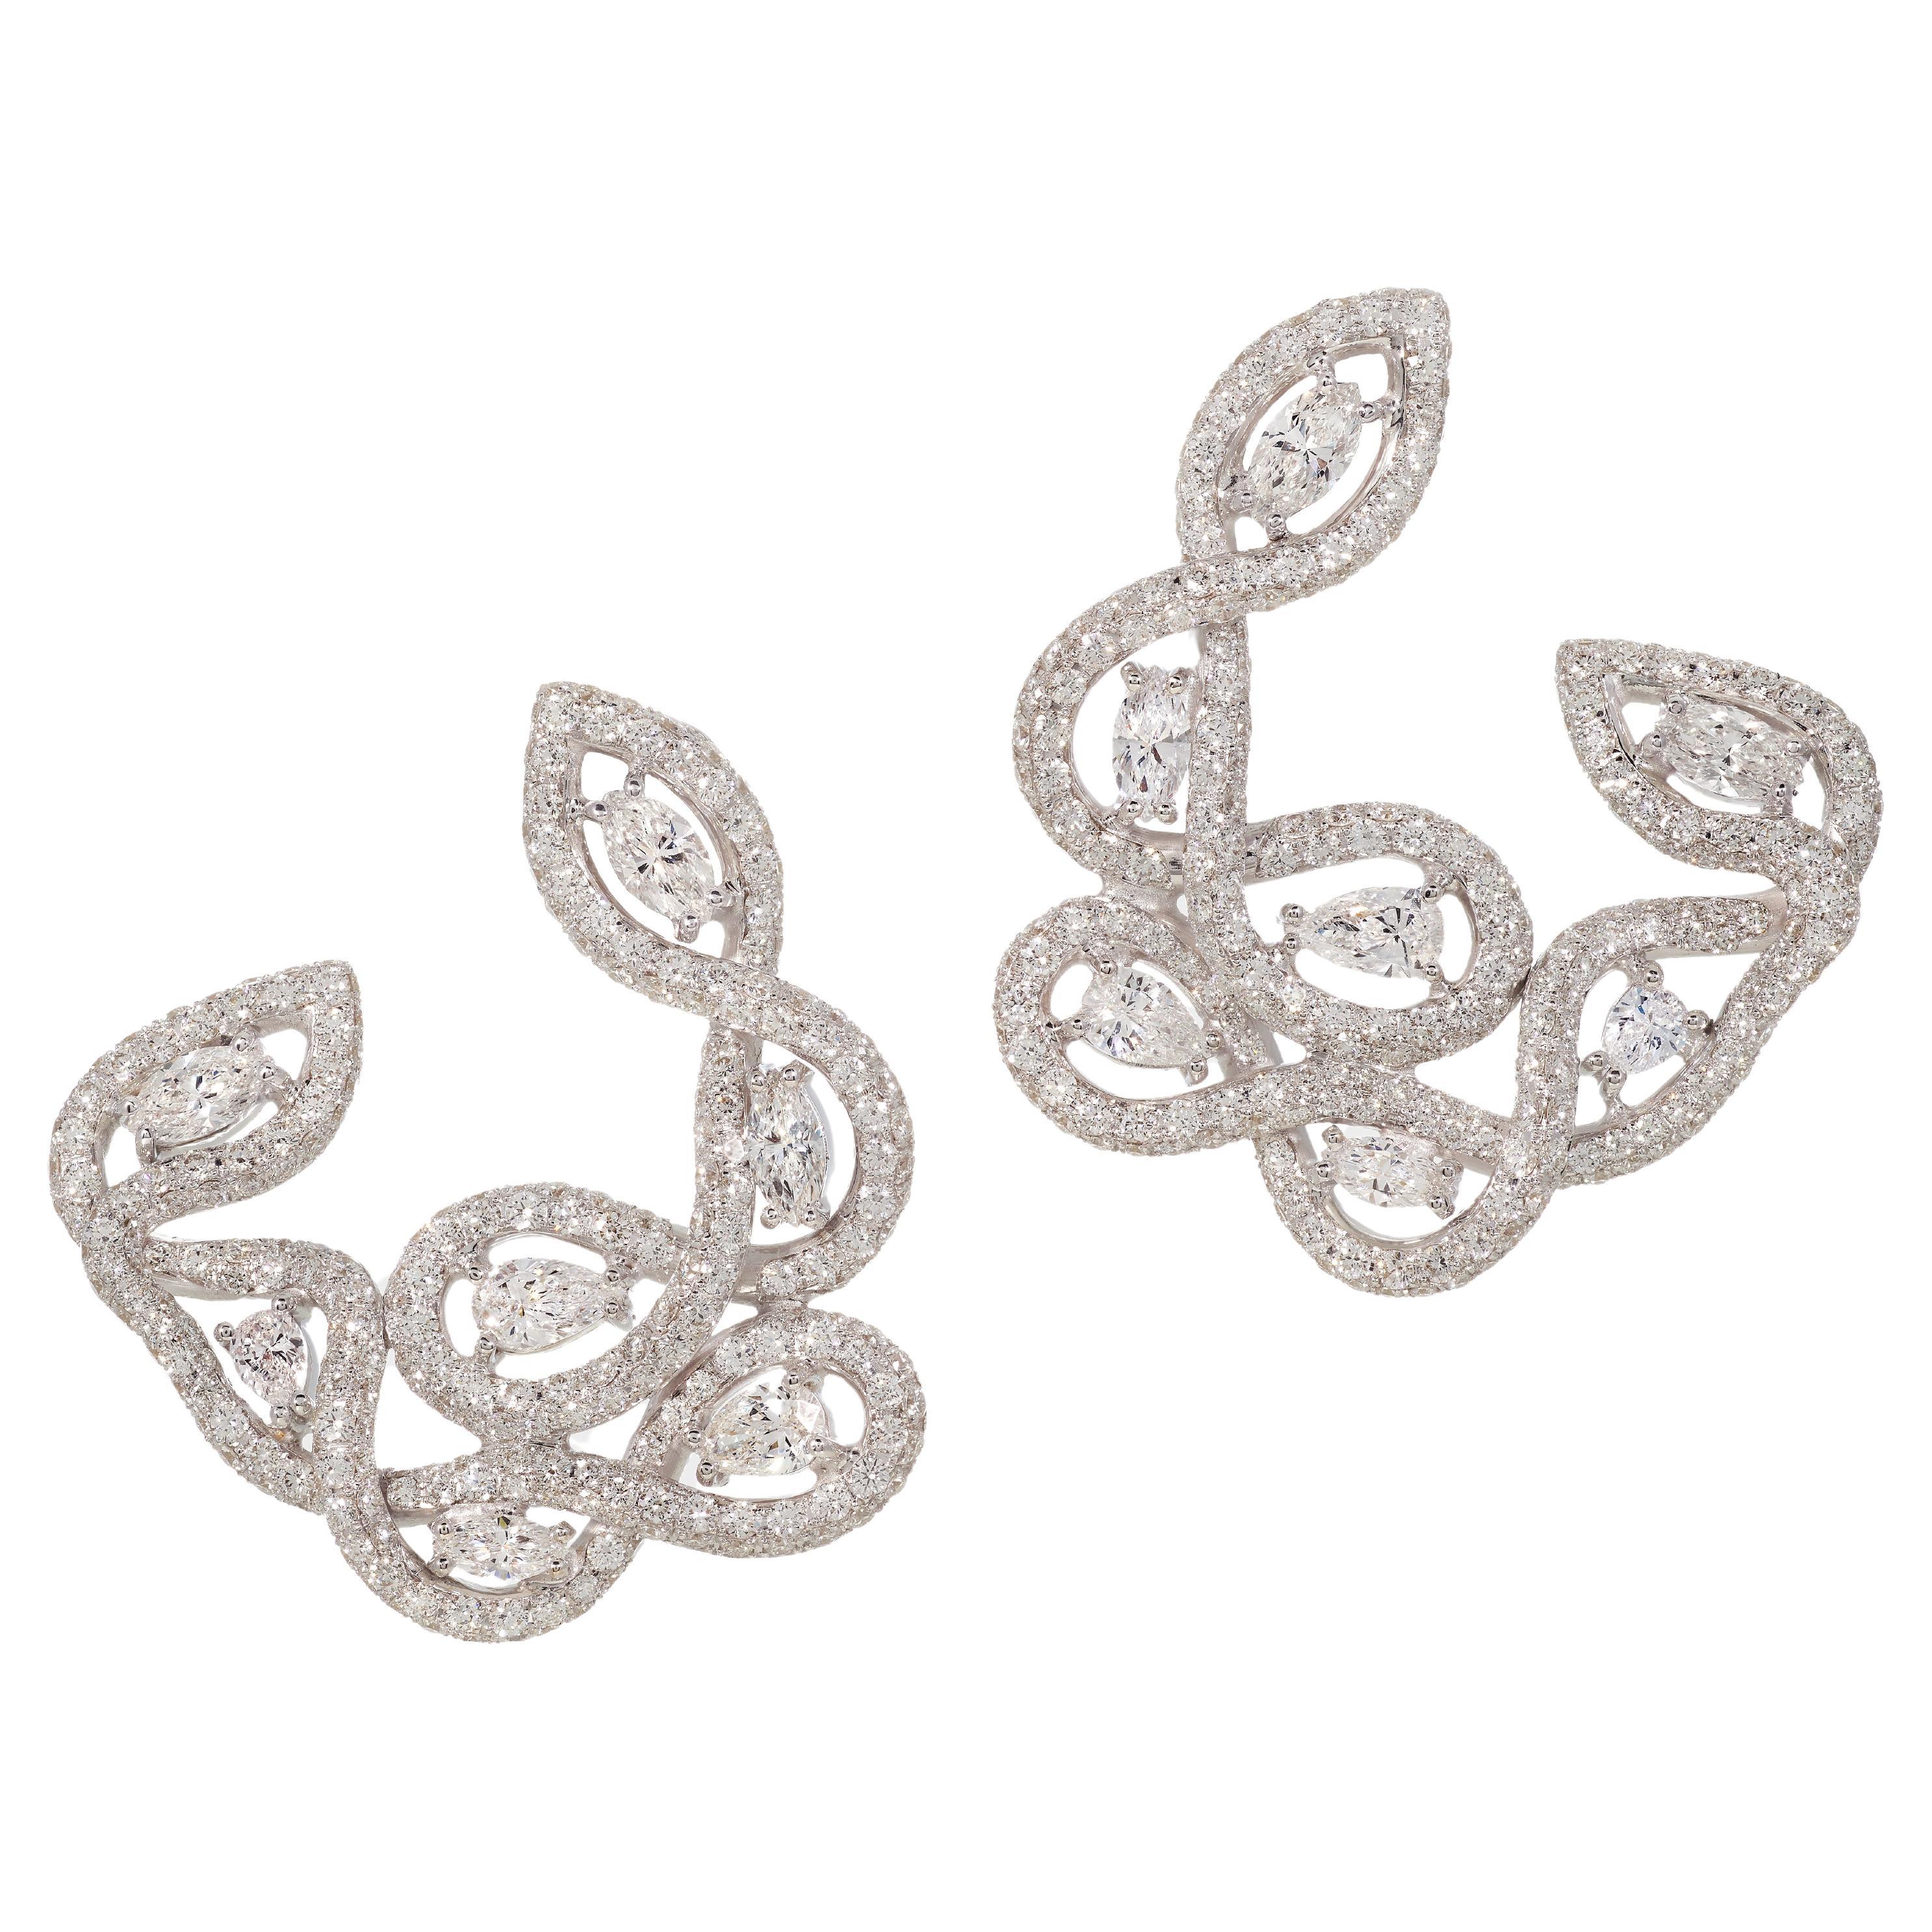 Marquise, Pear and Brilliant Cut Diamond Hoop Earrings set in White Gold